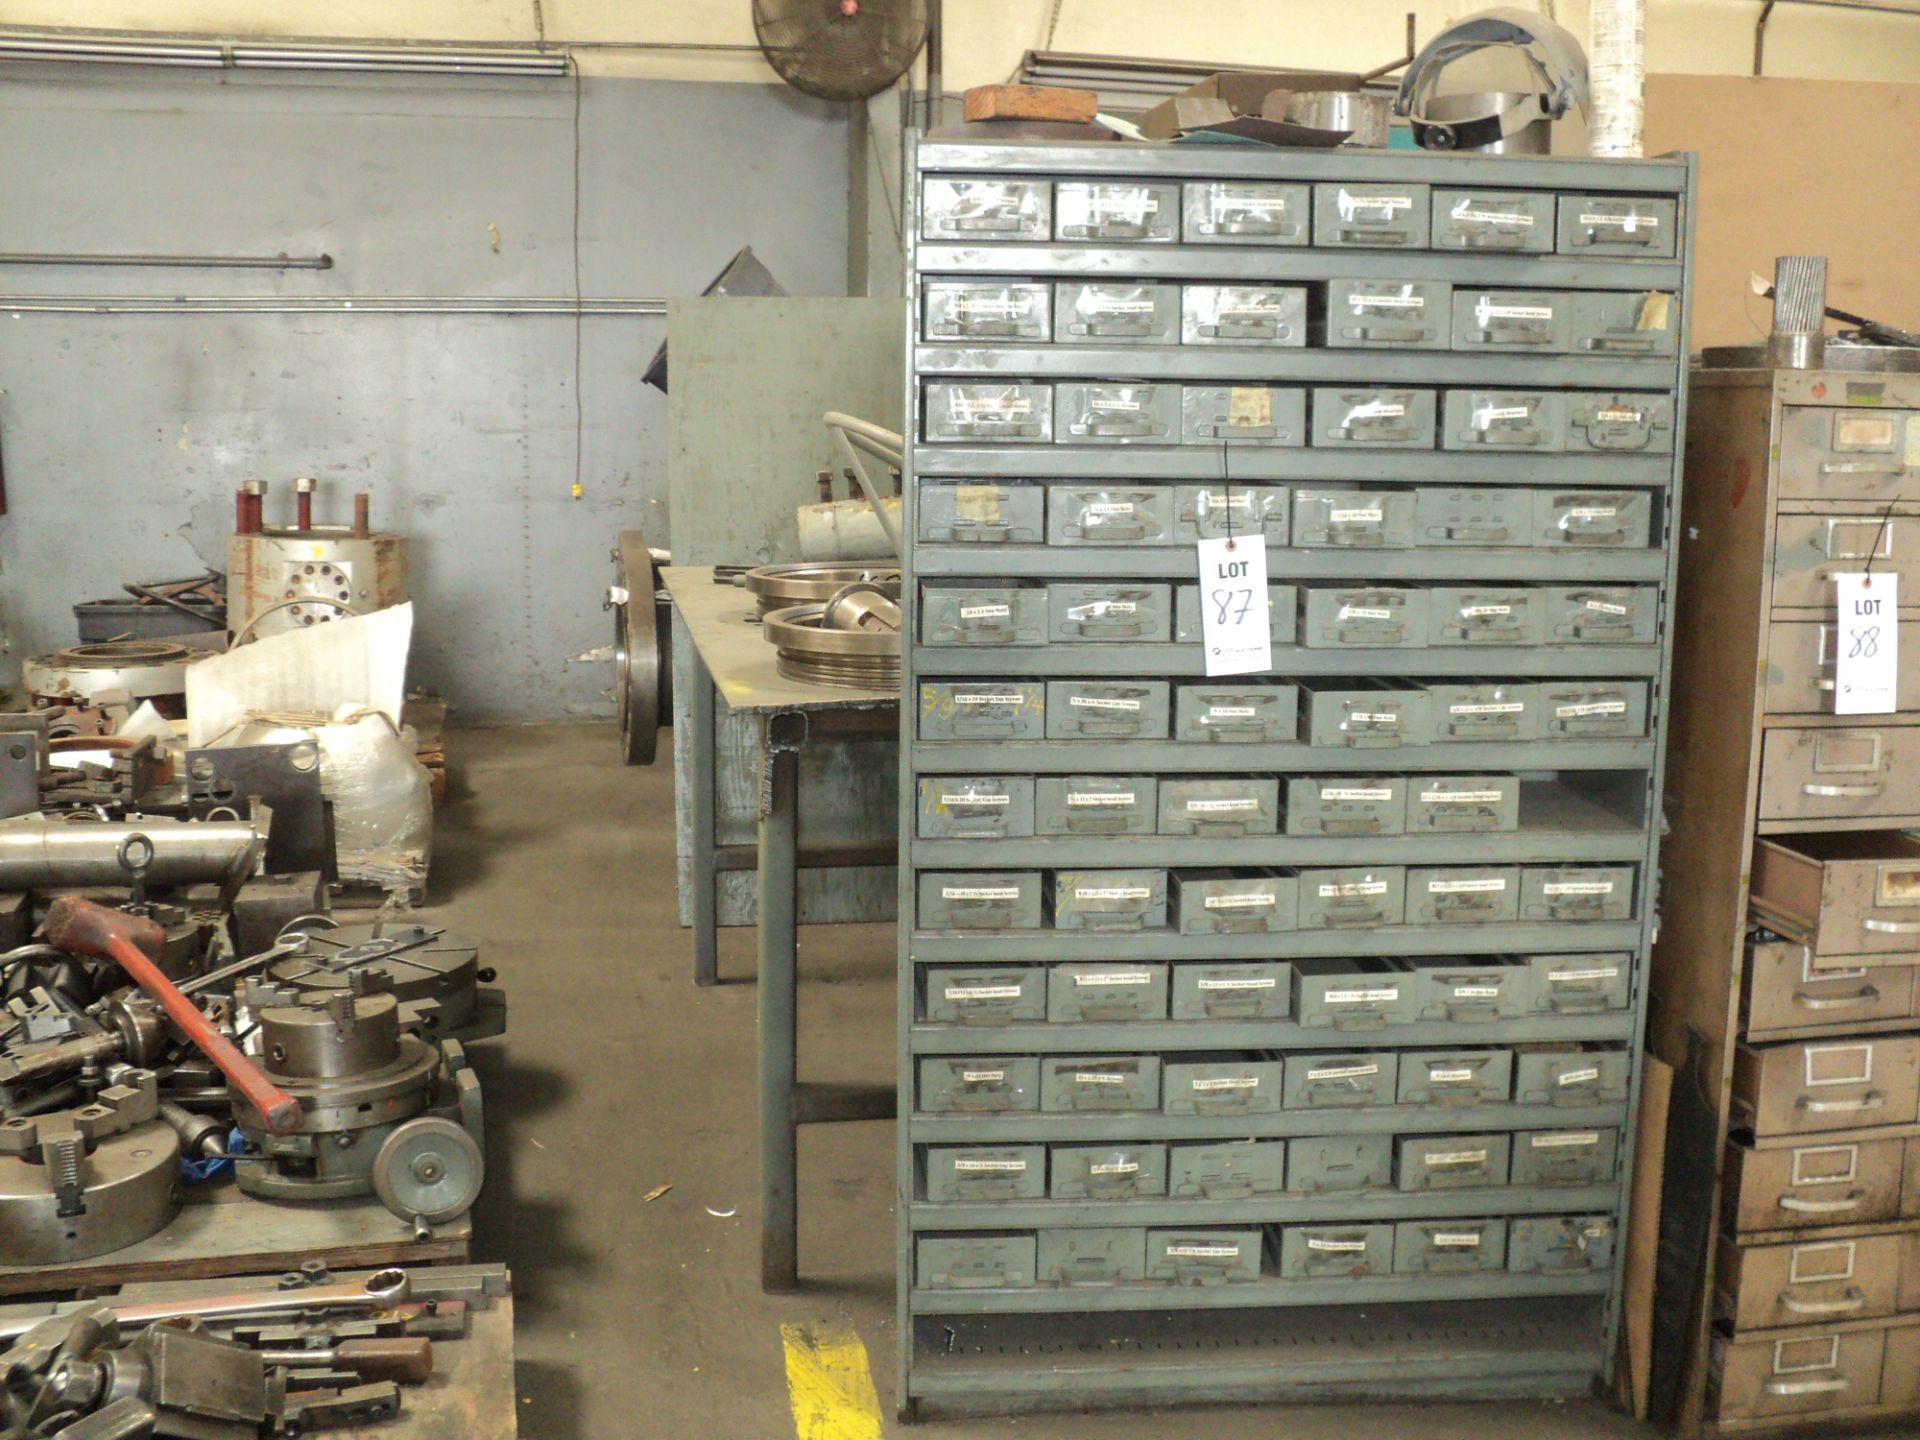 METAL PART BIN CABINET WITH CONTENTS, INCLUDING: HEX NUTS, SCREWS, BOLTS, LOCK WASHERS